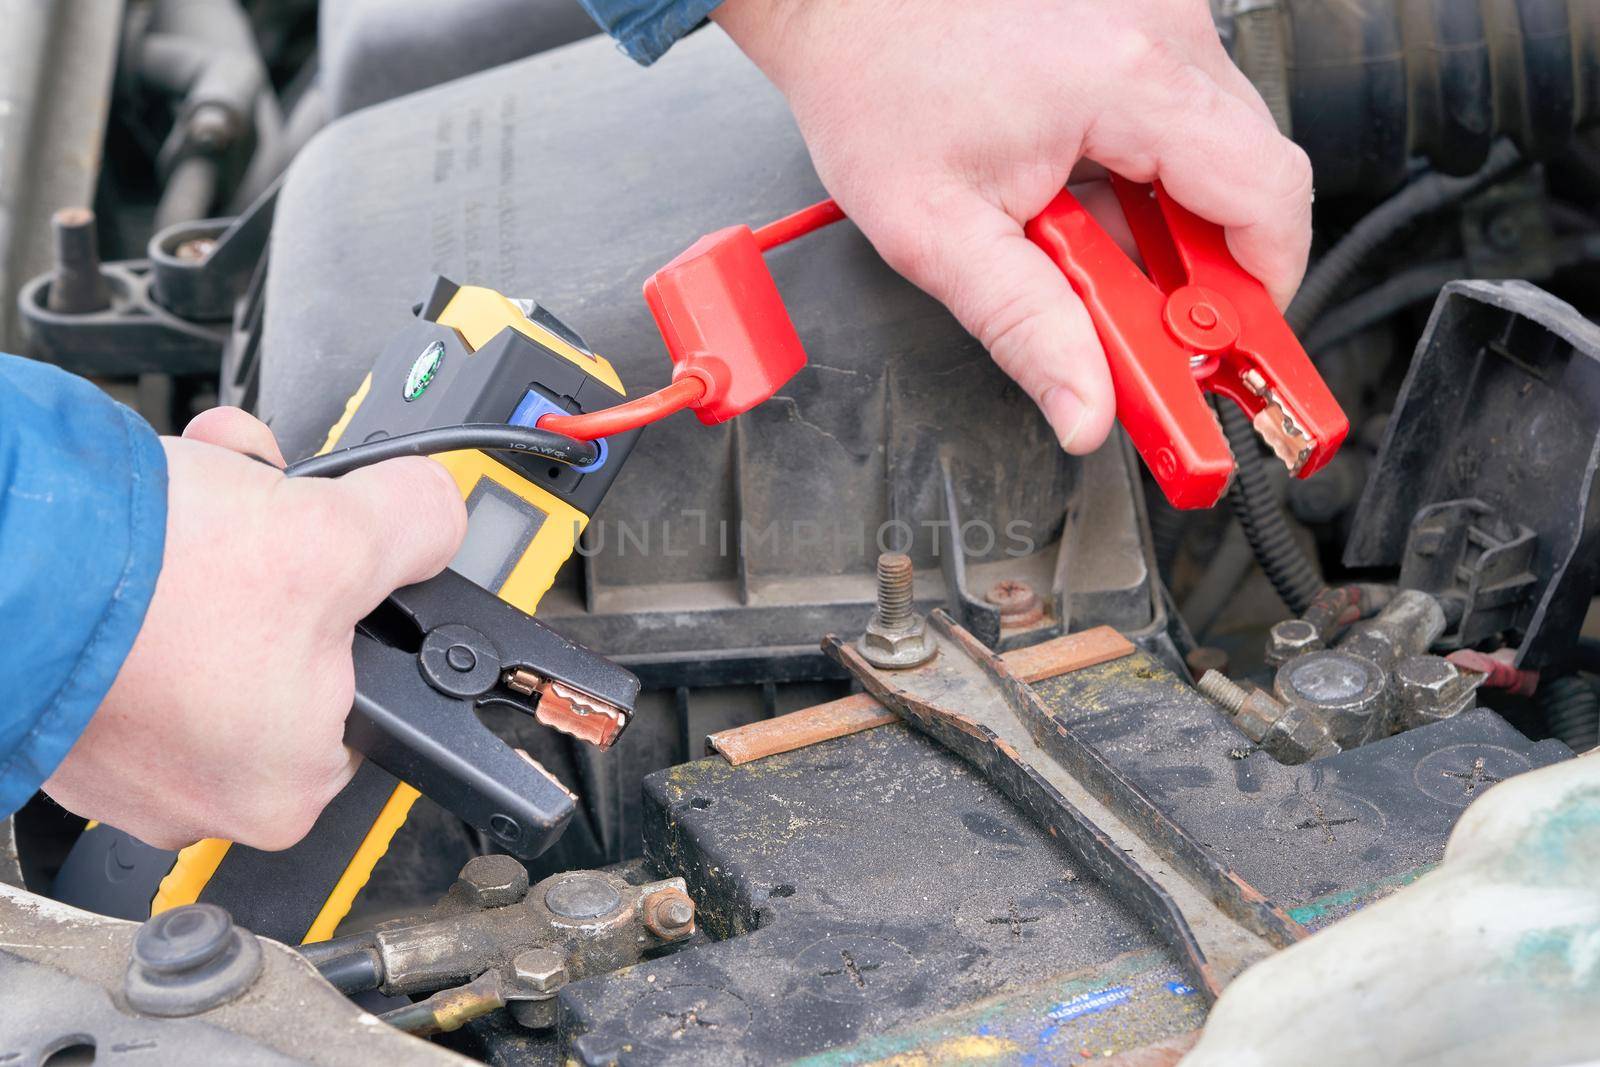 Hands connect the launcher clips to the car's battery